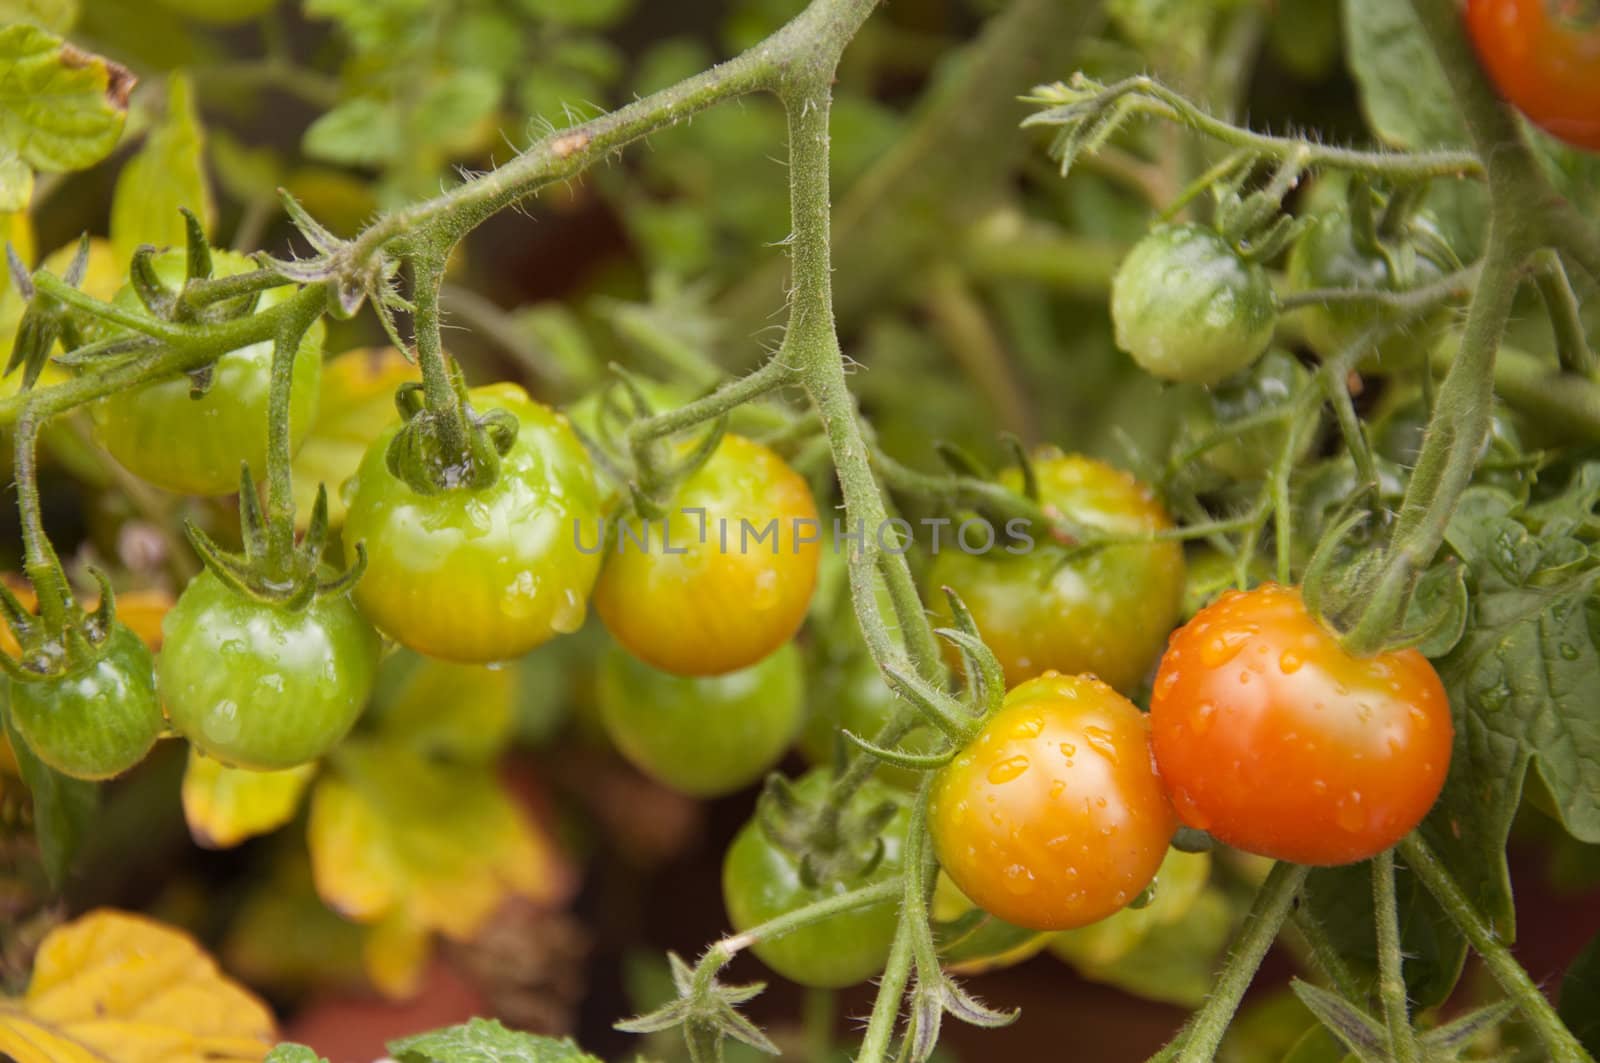 A bunch of tomatoes ripening in the garden